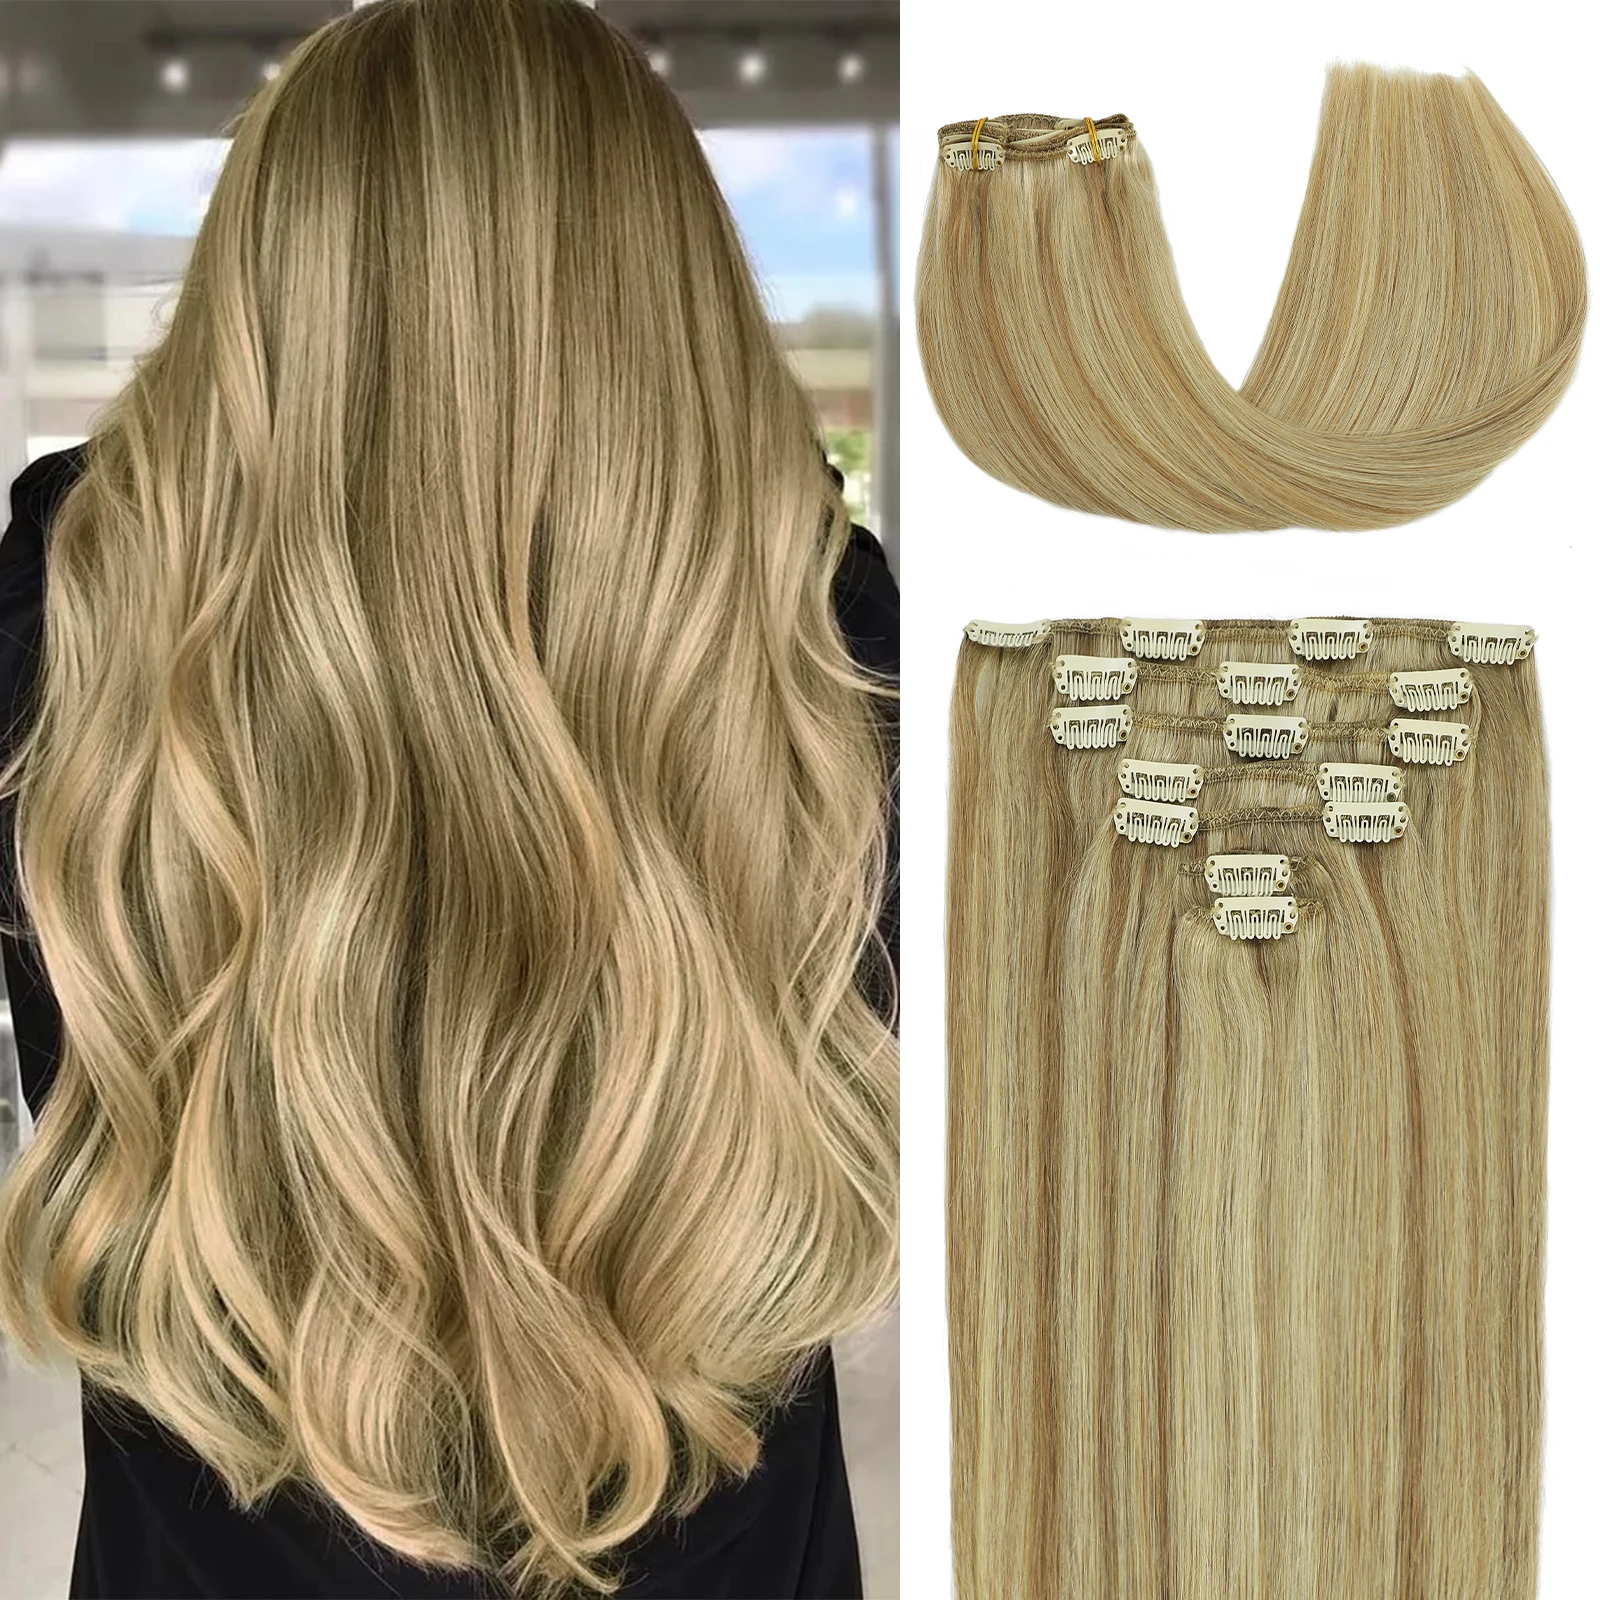 Straight Clip in Hair Extensions for Women Brazilian Human Hair Extensions 7Pcs Remy Hair Extensions Clip in Human Hair